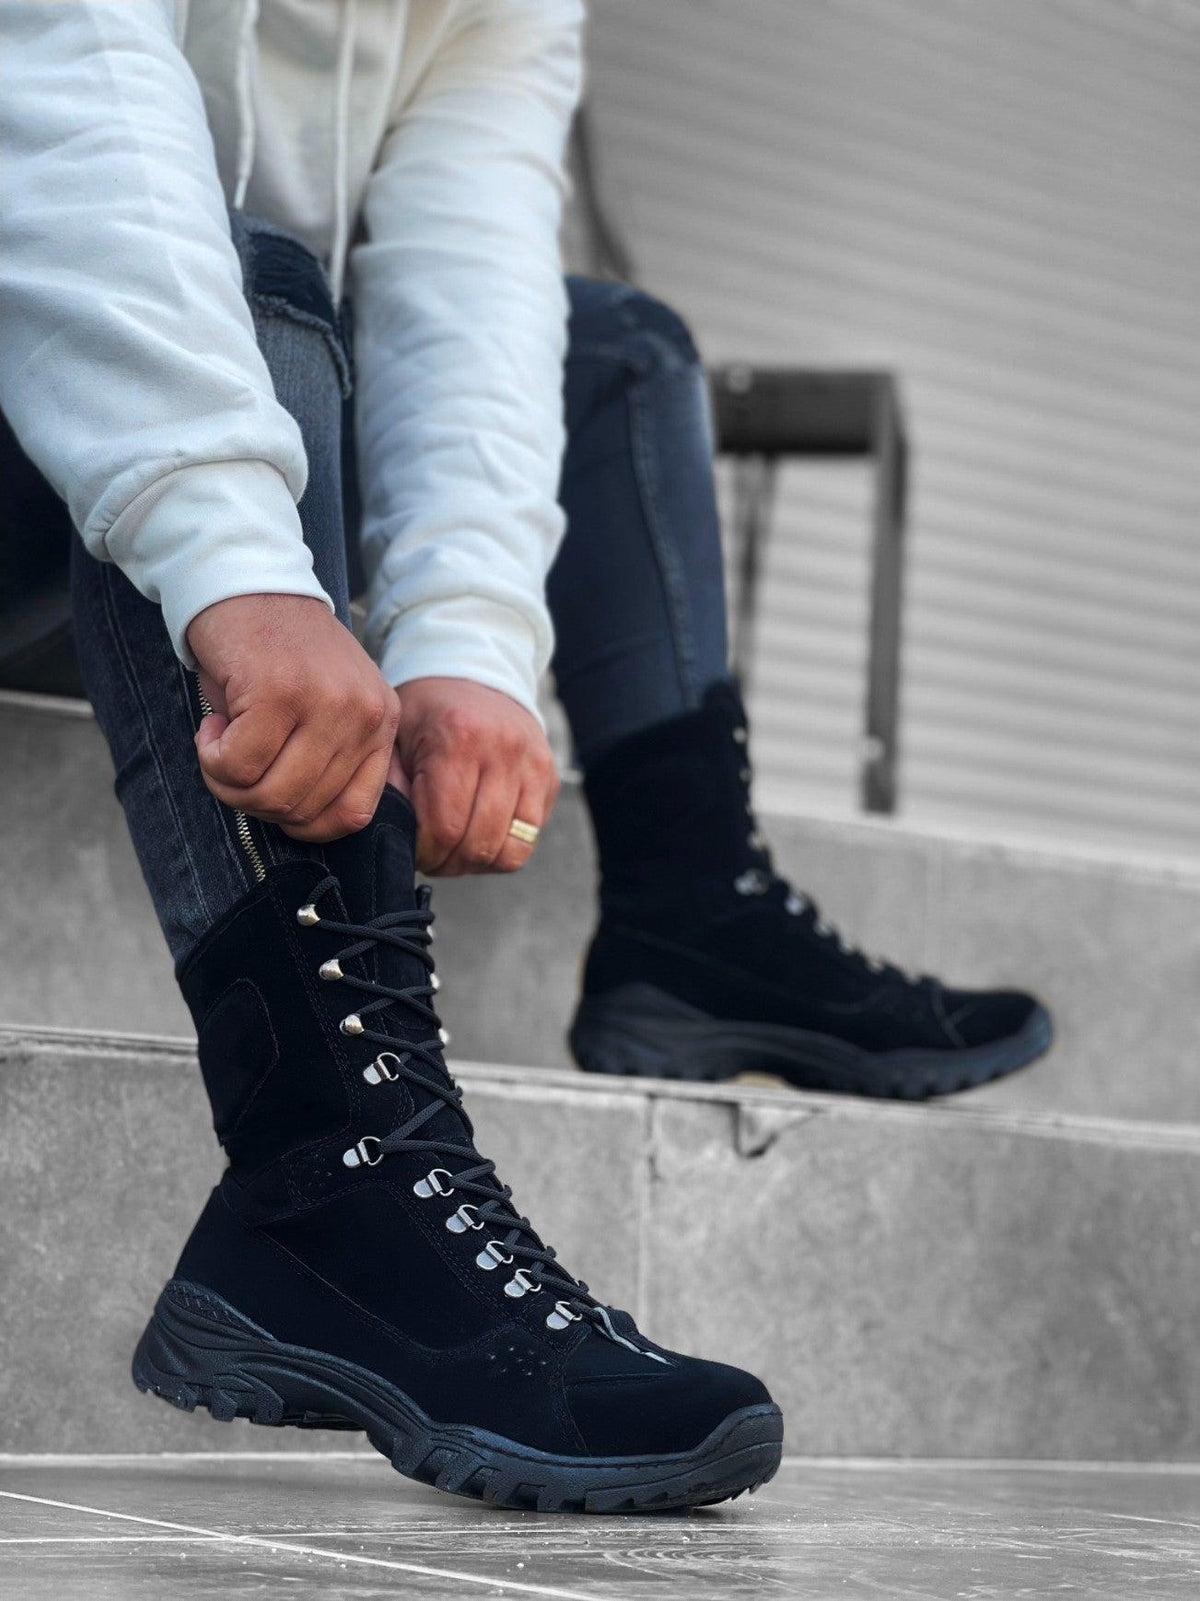 BA0605 Lace-up Black Suede Military Boots - STREET MODE ™